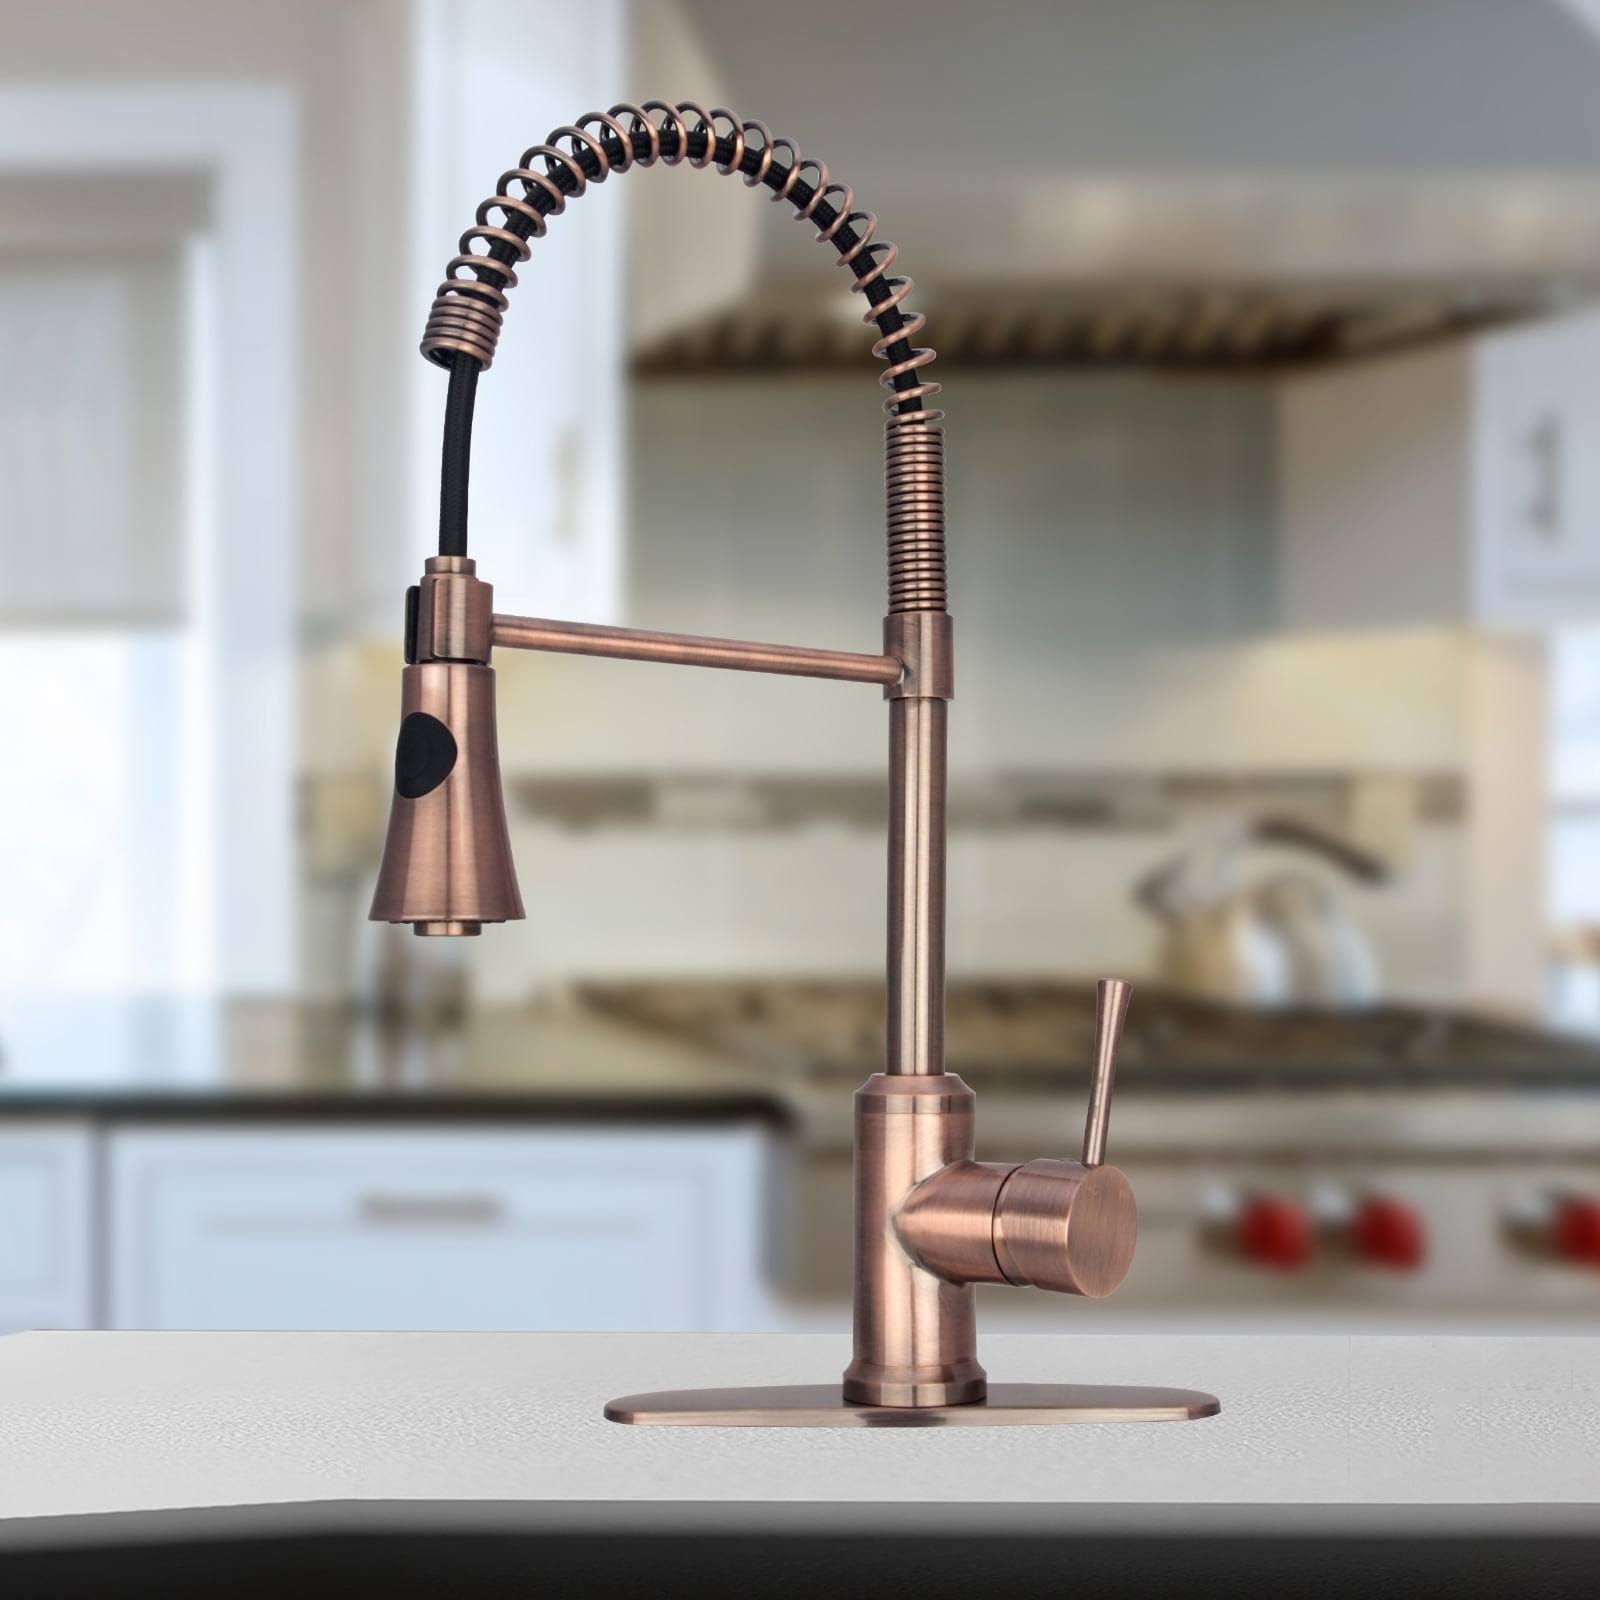 Rust-Resistant Copper Kitchen Faucet with Pull-Down Sprayer | Image